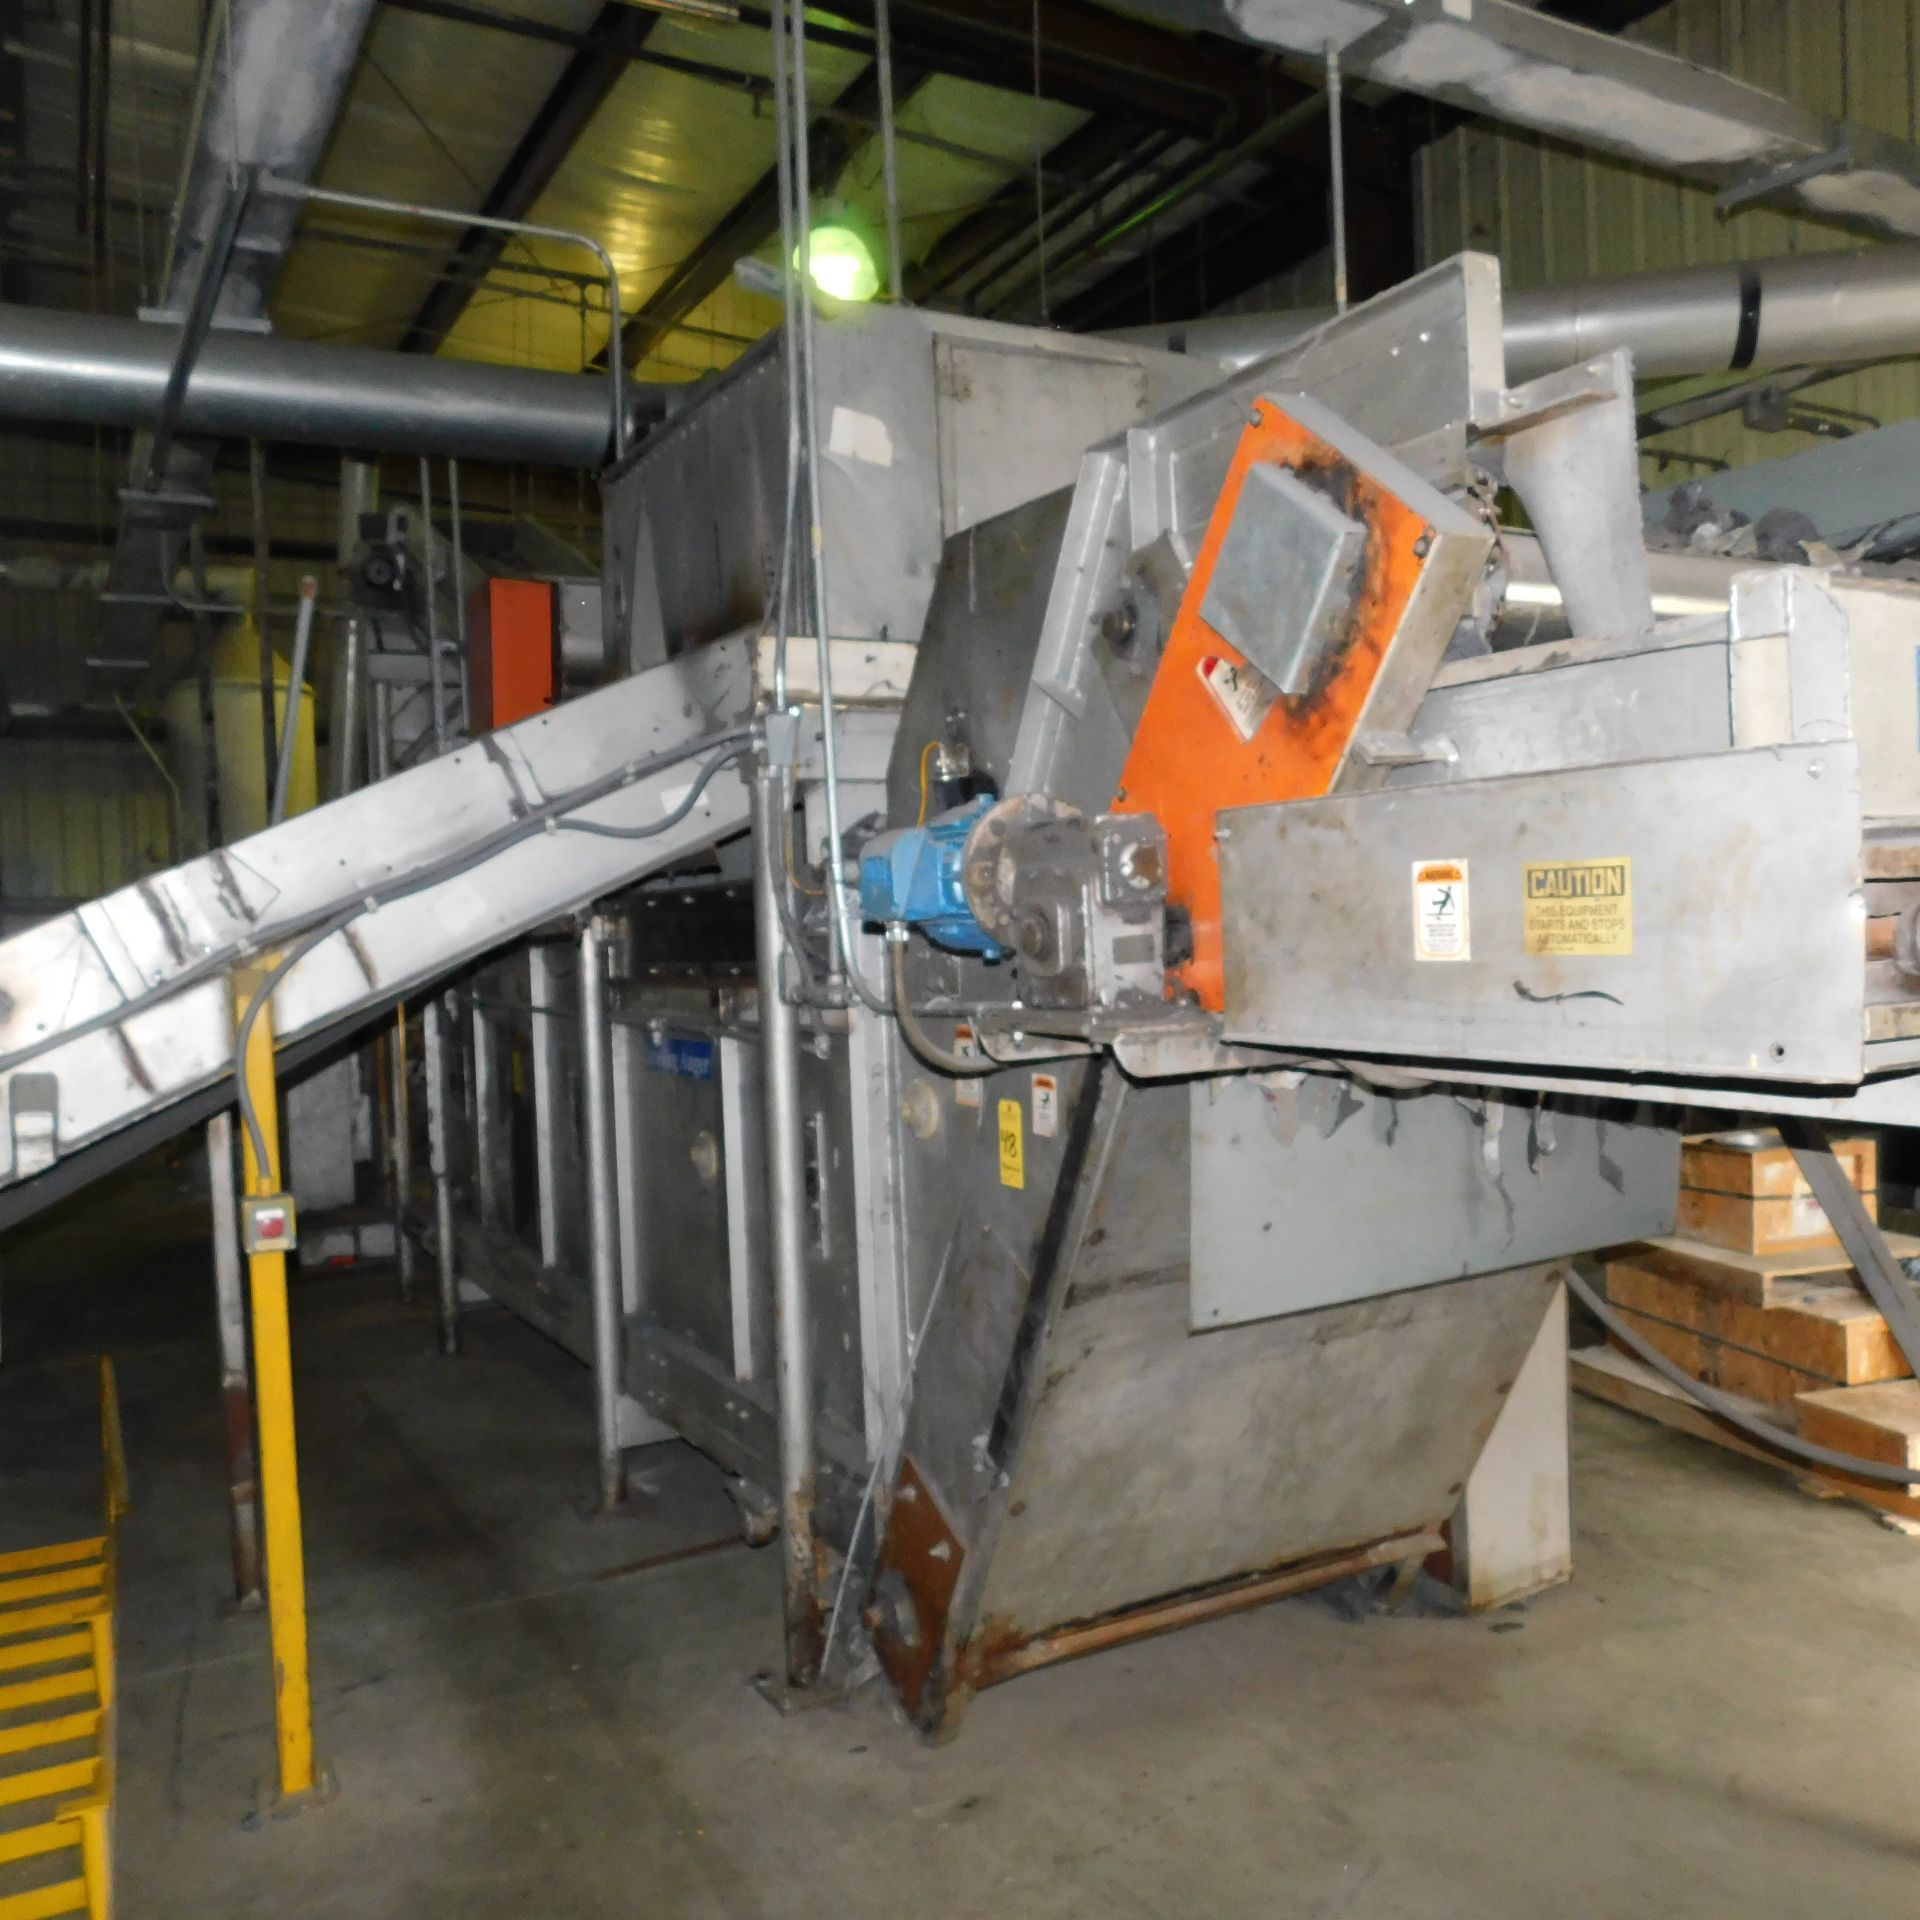 Carpet Shredding and Grinding System, Including (2) 150 HP Fluff Grinders and Fluff Meters, Blowers, - Image 23 of 23